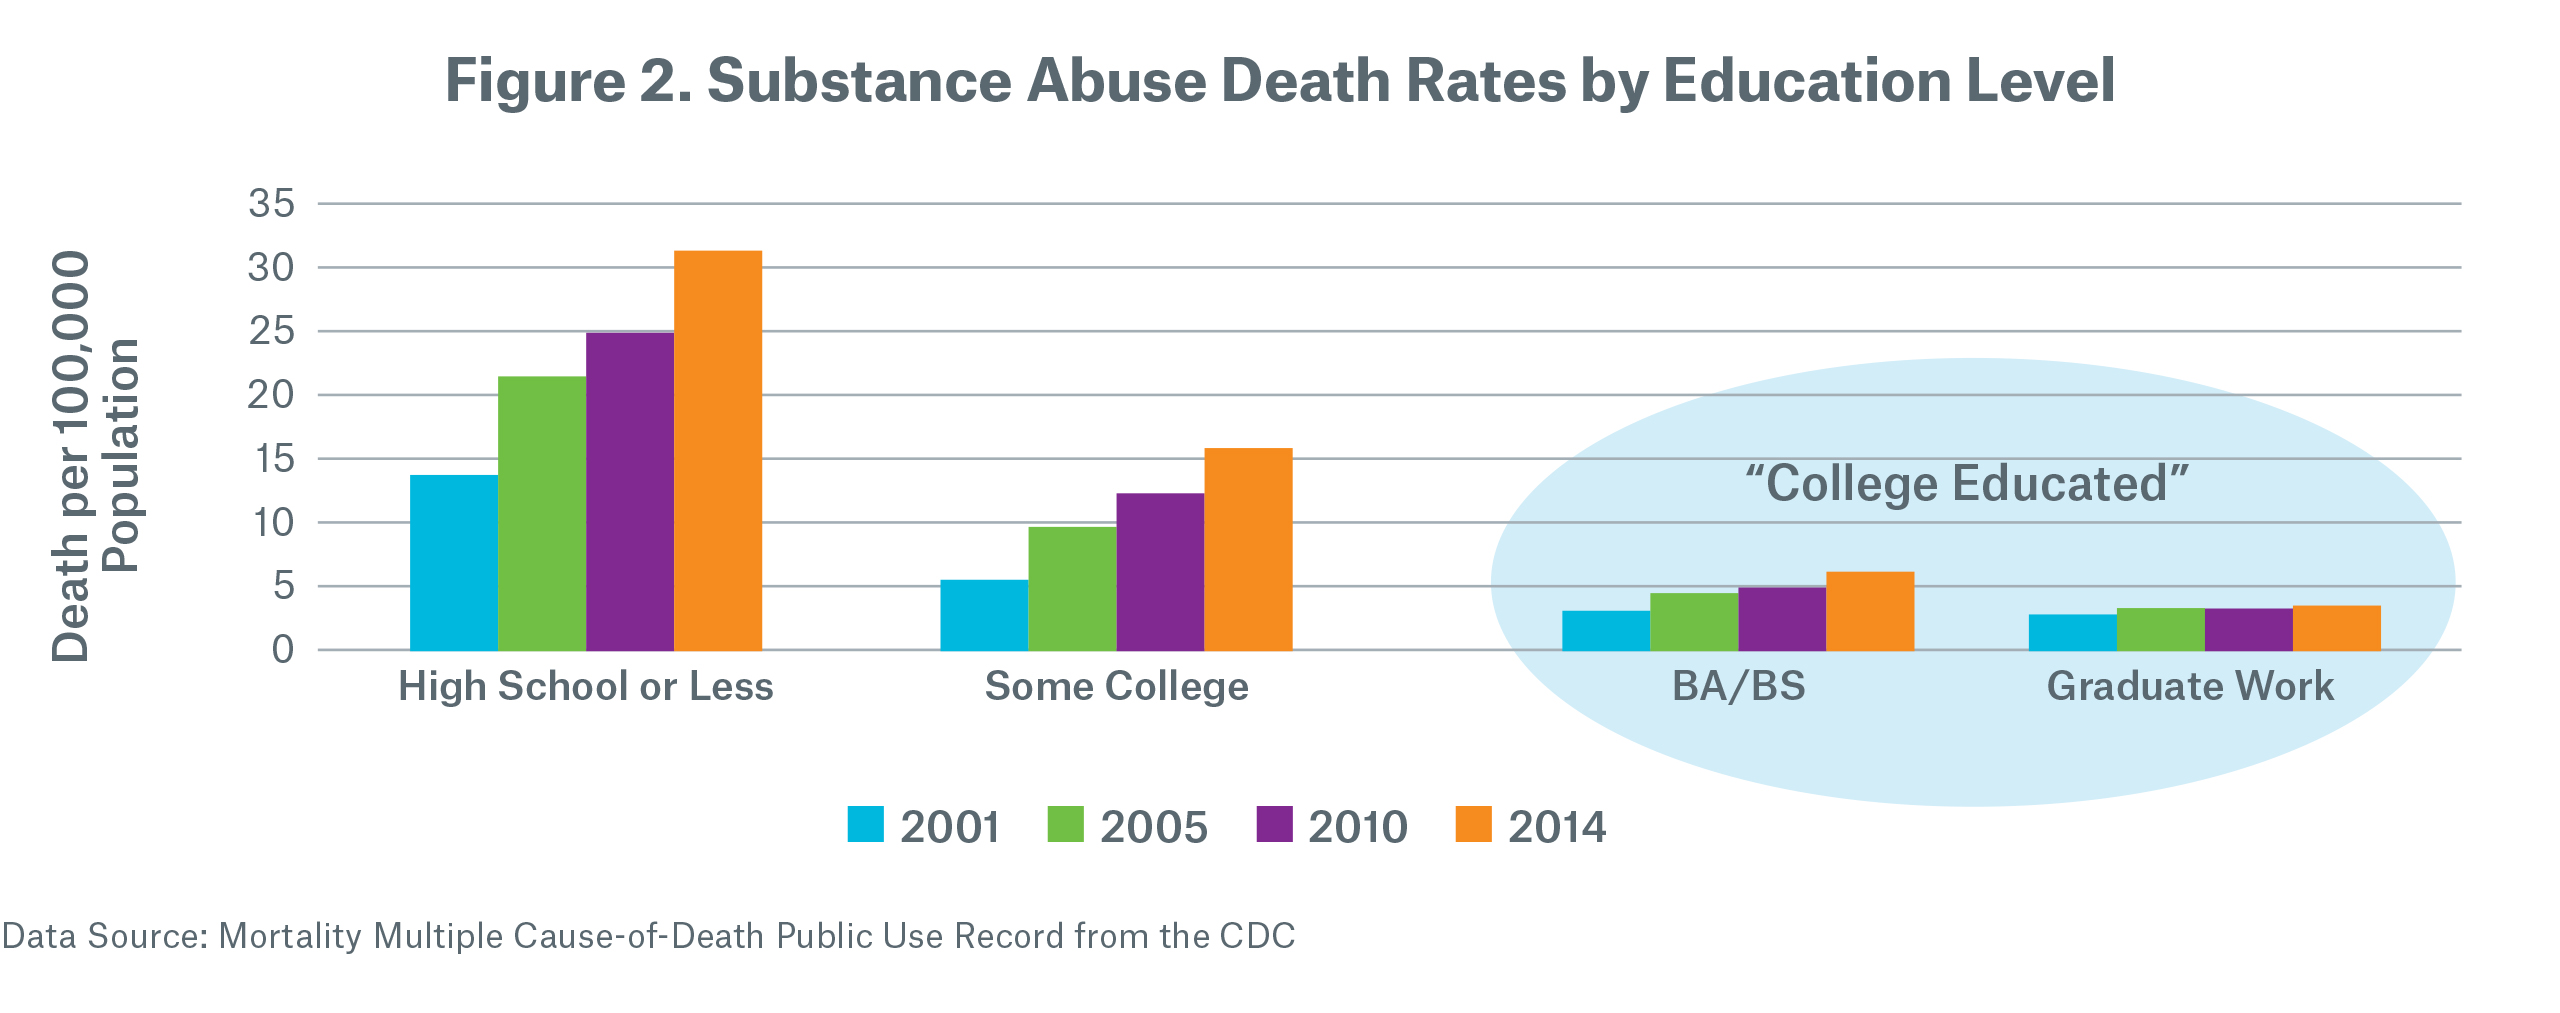 Substance Abuse Death Rates by Education Level Figure